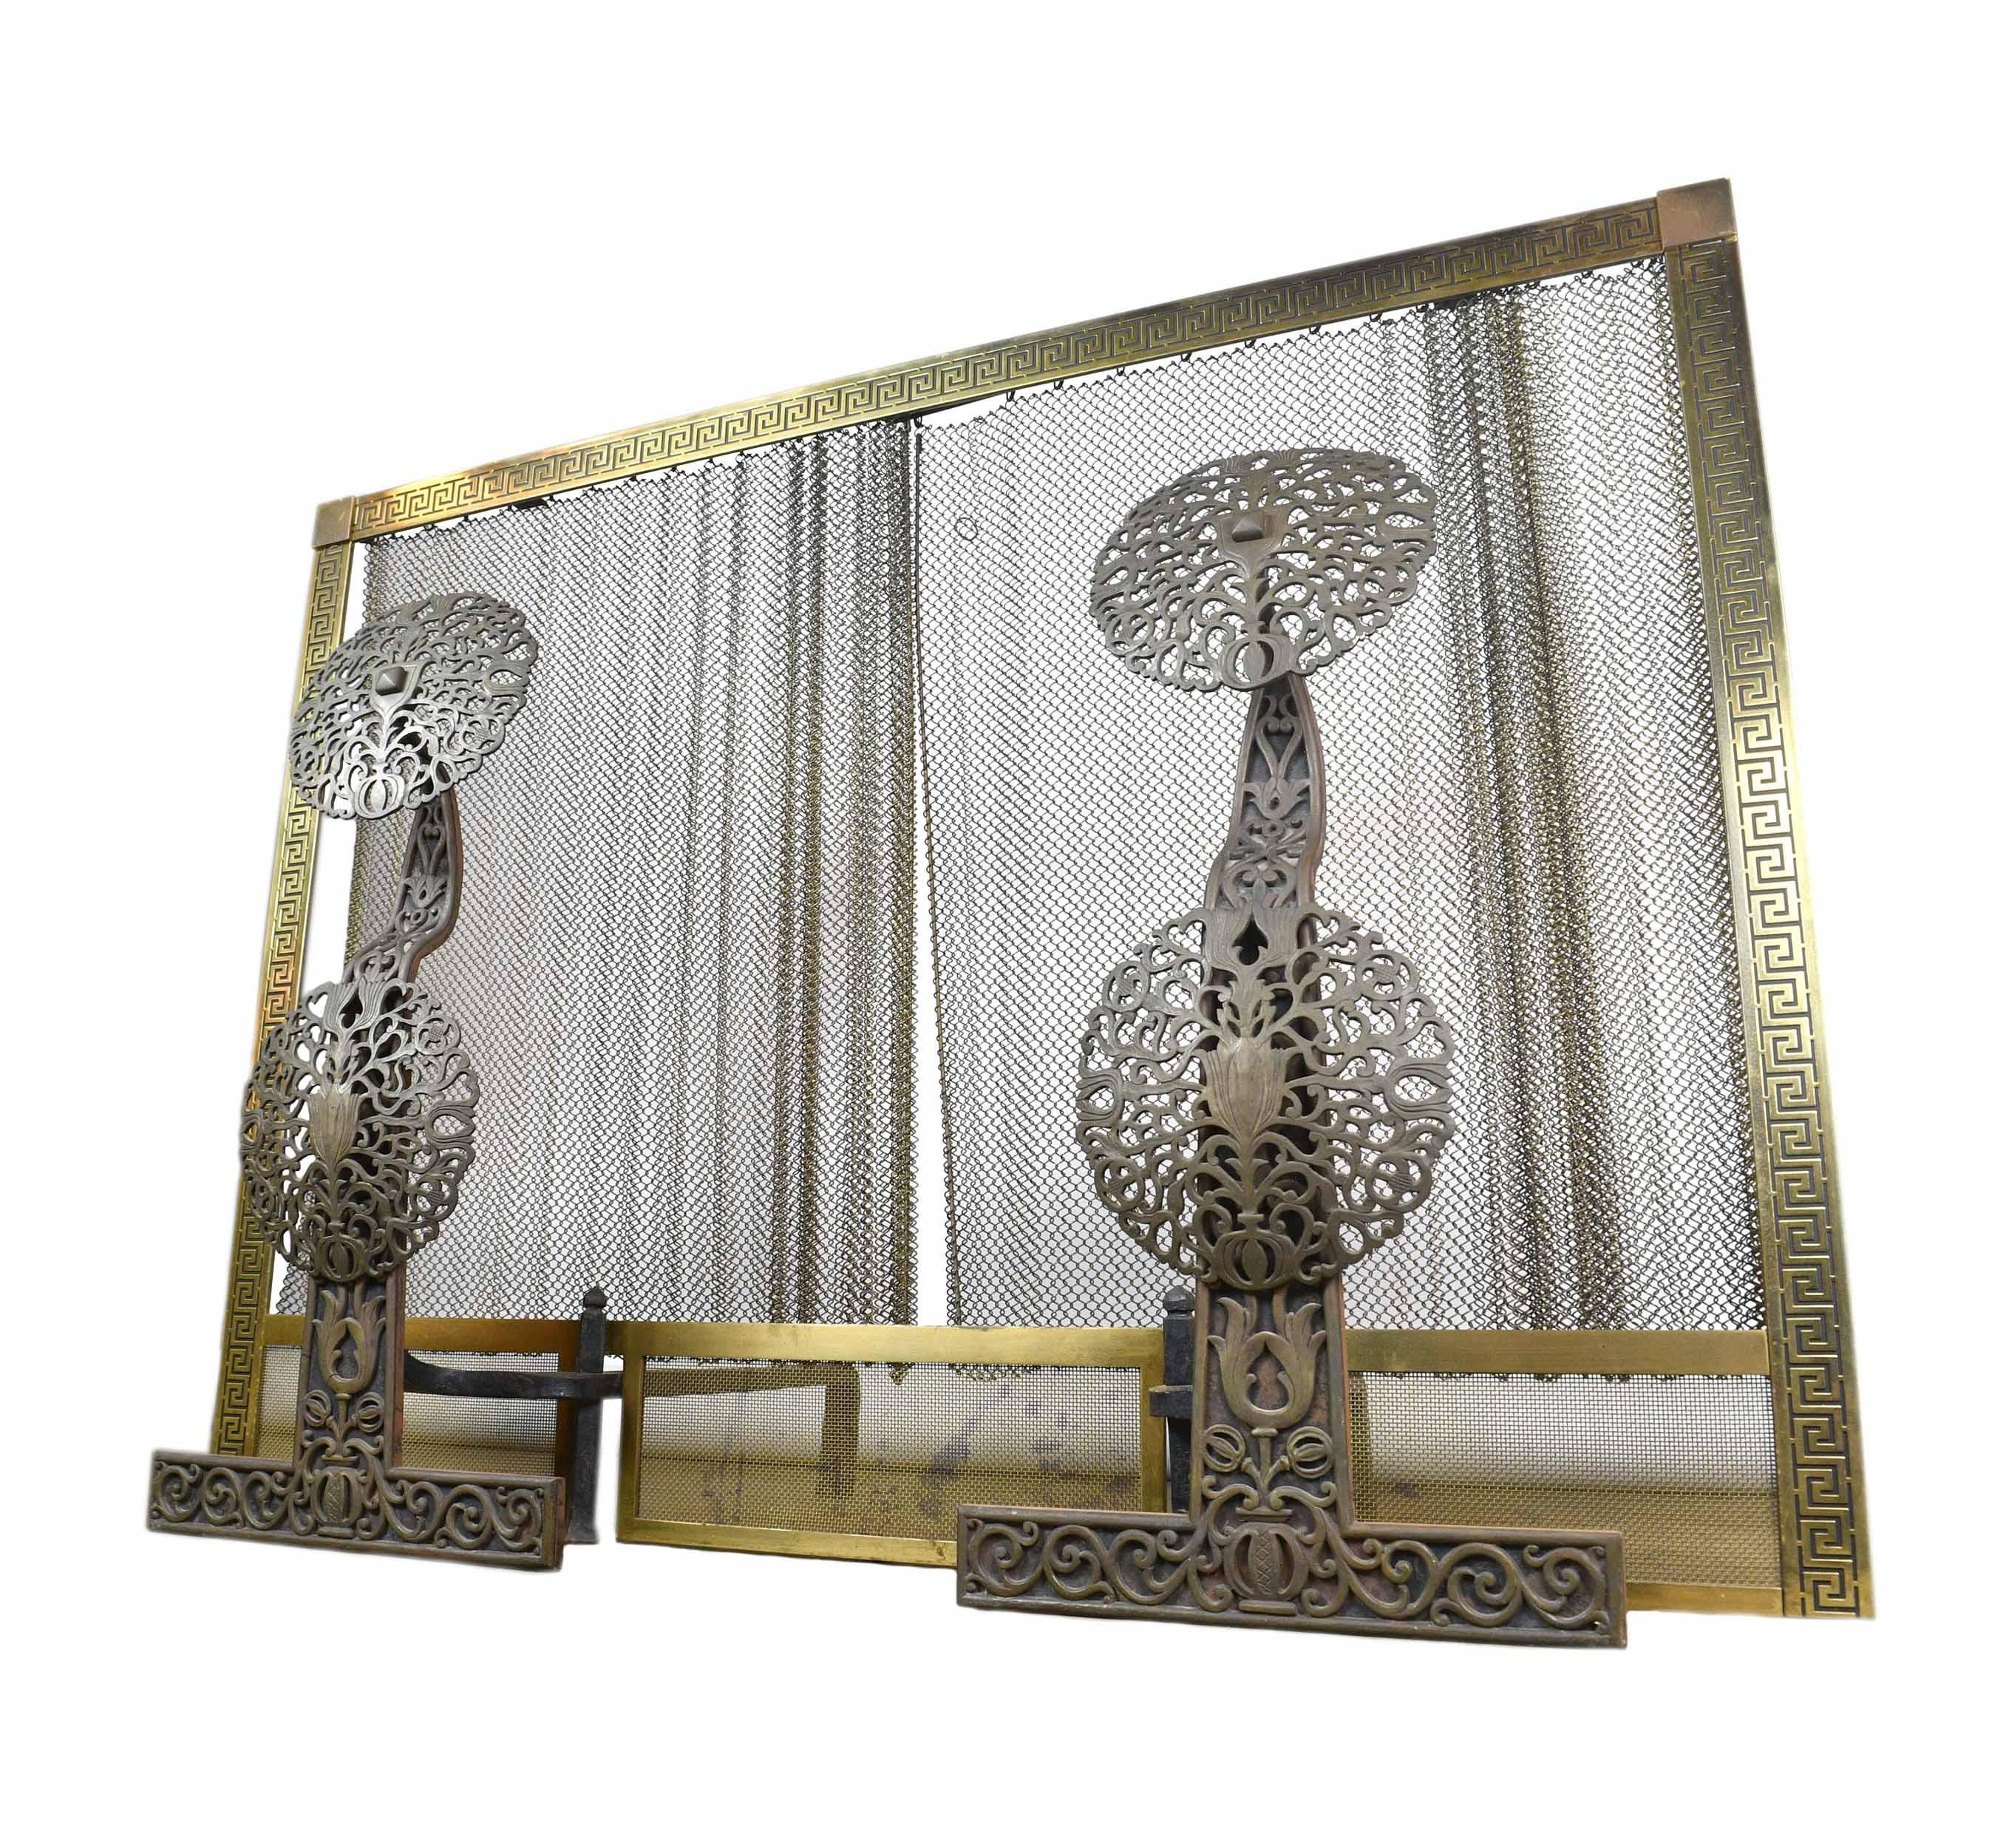 This stunningly crafted pair of andirons features intricate craftsmanship that needs to be seen to believe! Made of lovely bronze-faced iron, these andirons would bring great character to any space. Sold as a pair with a geometrically patterned